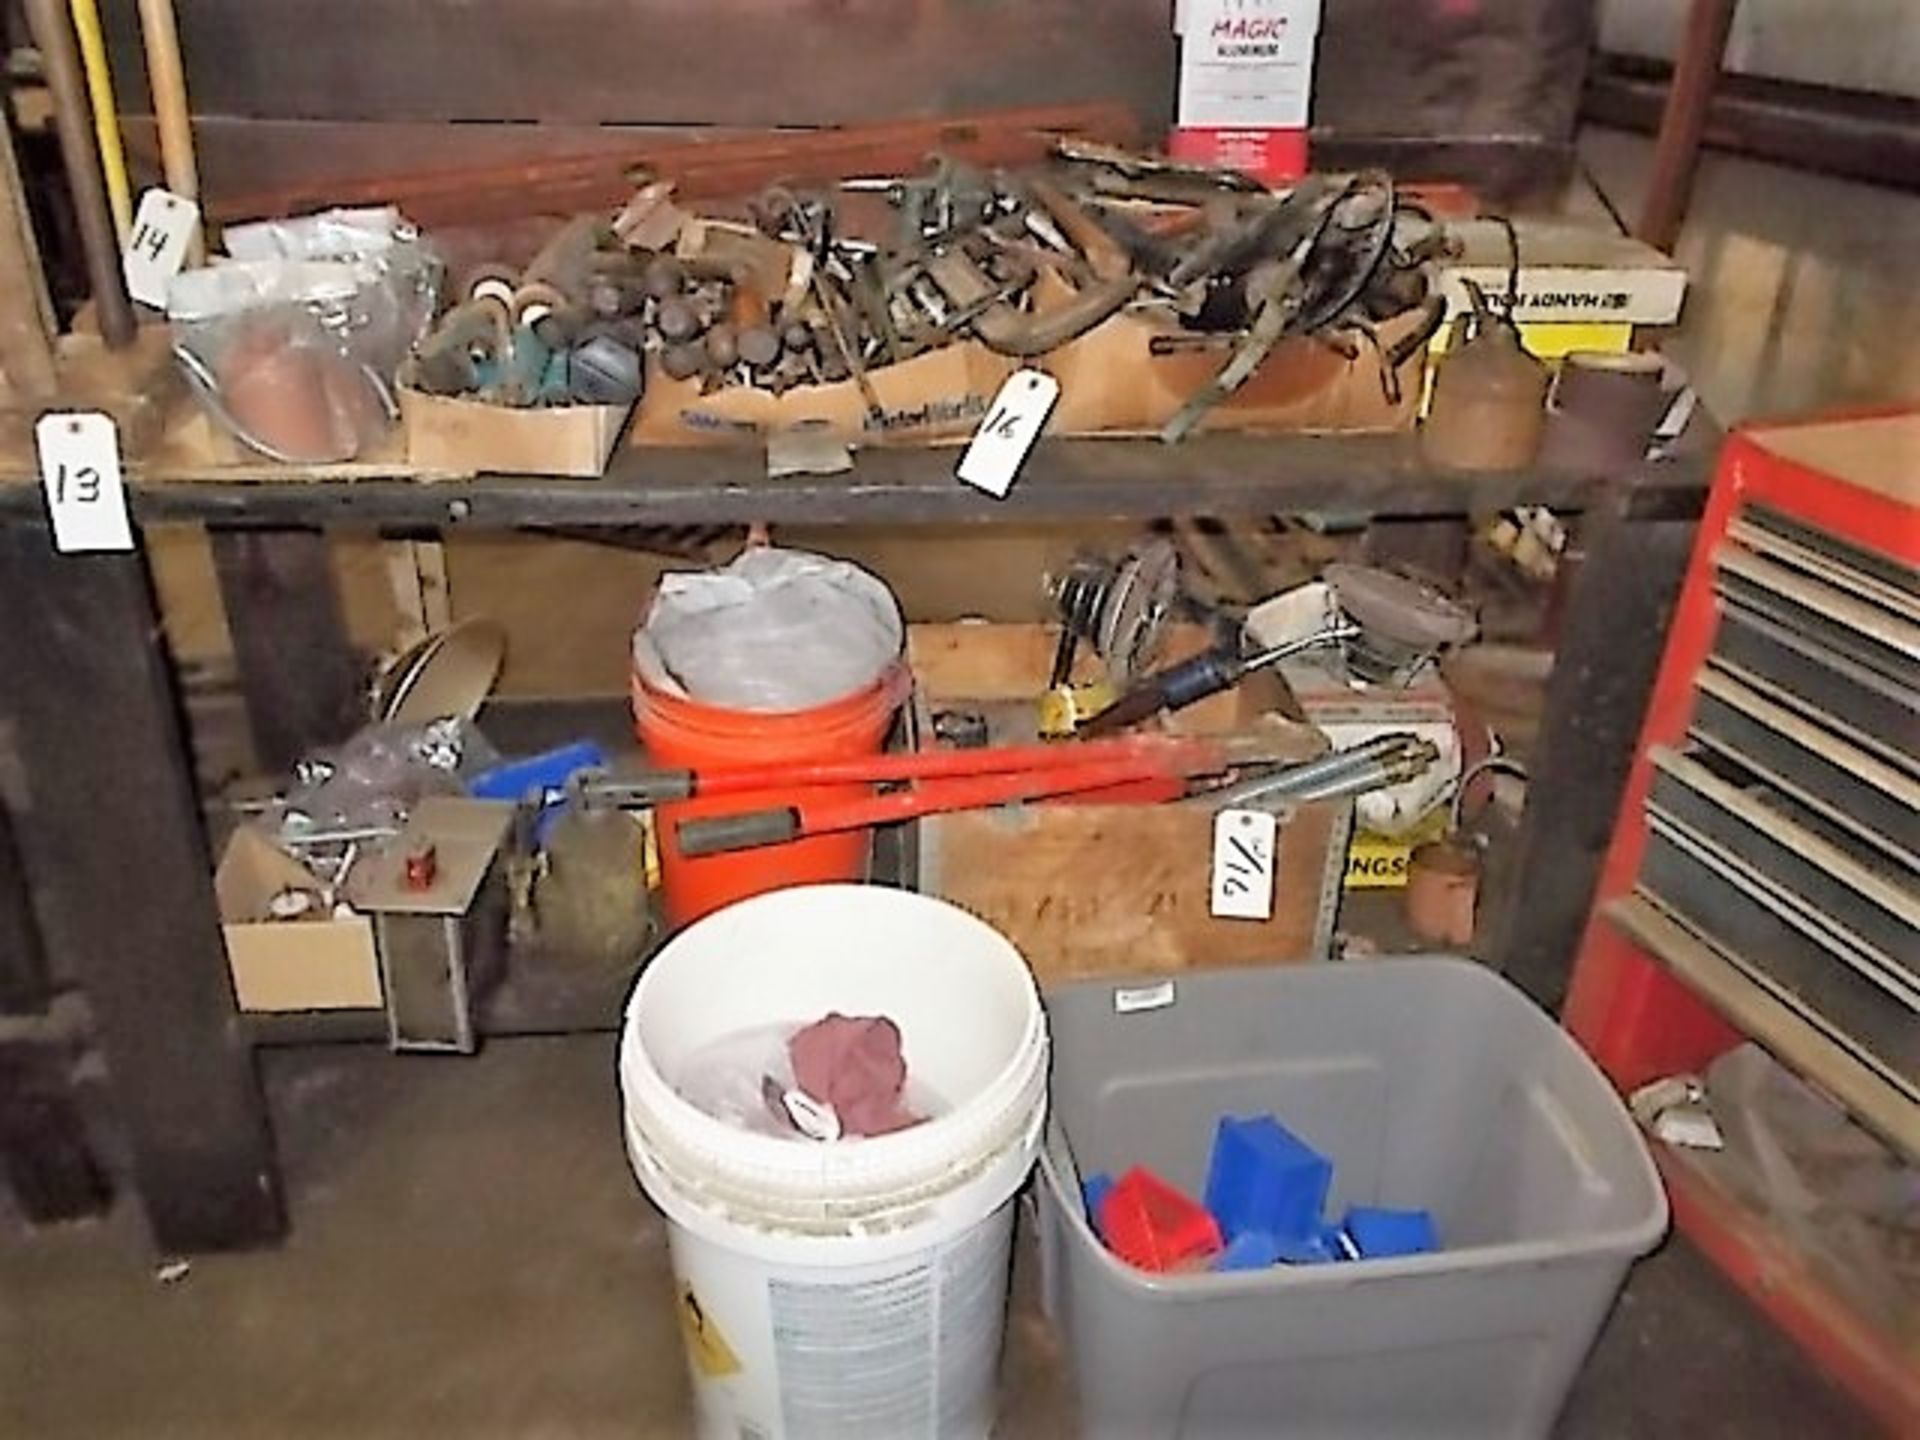 LOT MISC. SHOP HAND TOOLING, SHOP RAGS, EMERY CLOTH, SHIM STOCK, PNEUMATIC DIE GRINDERS, FILES,